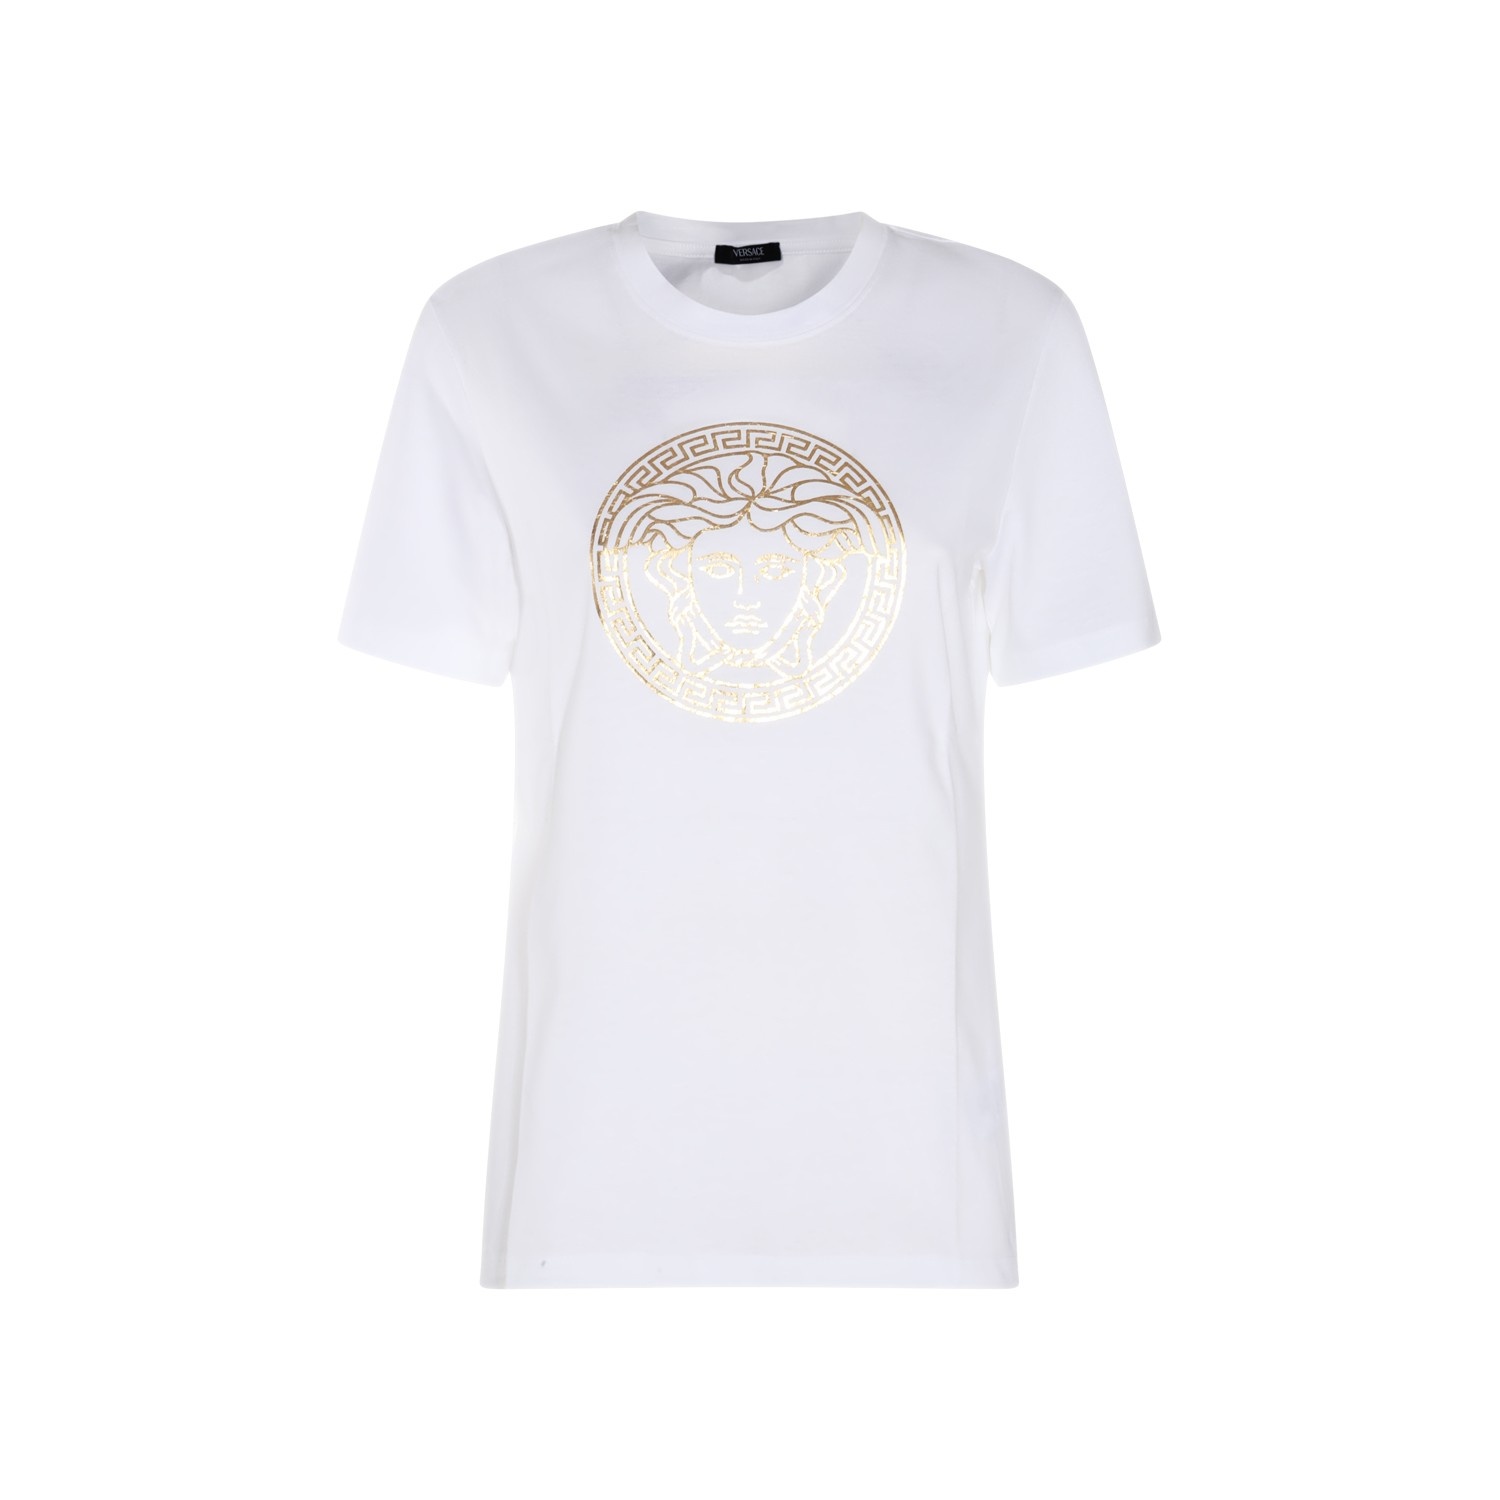 WHITE AND GOLD-TONE COTTON T-SHIRT - 1